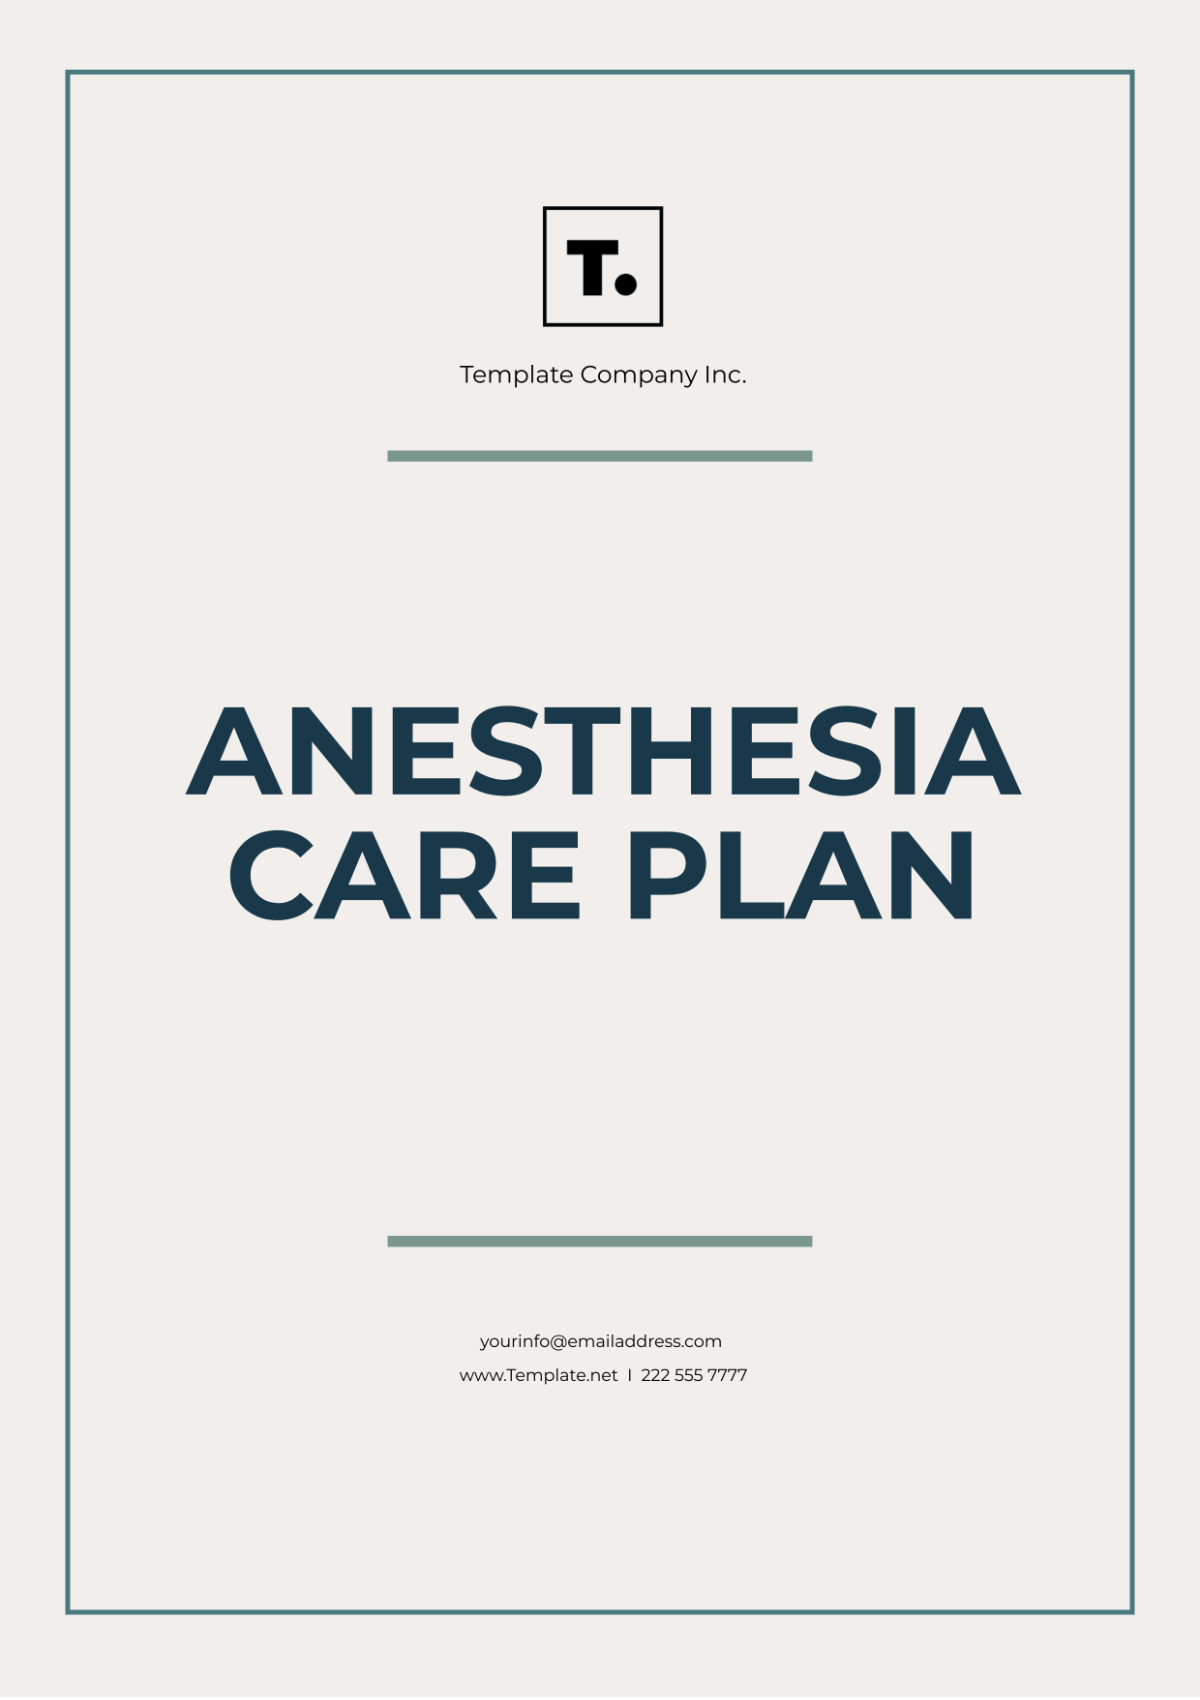 Anesthesia Care Plan Template